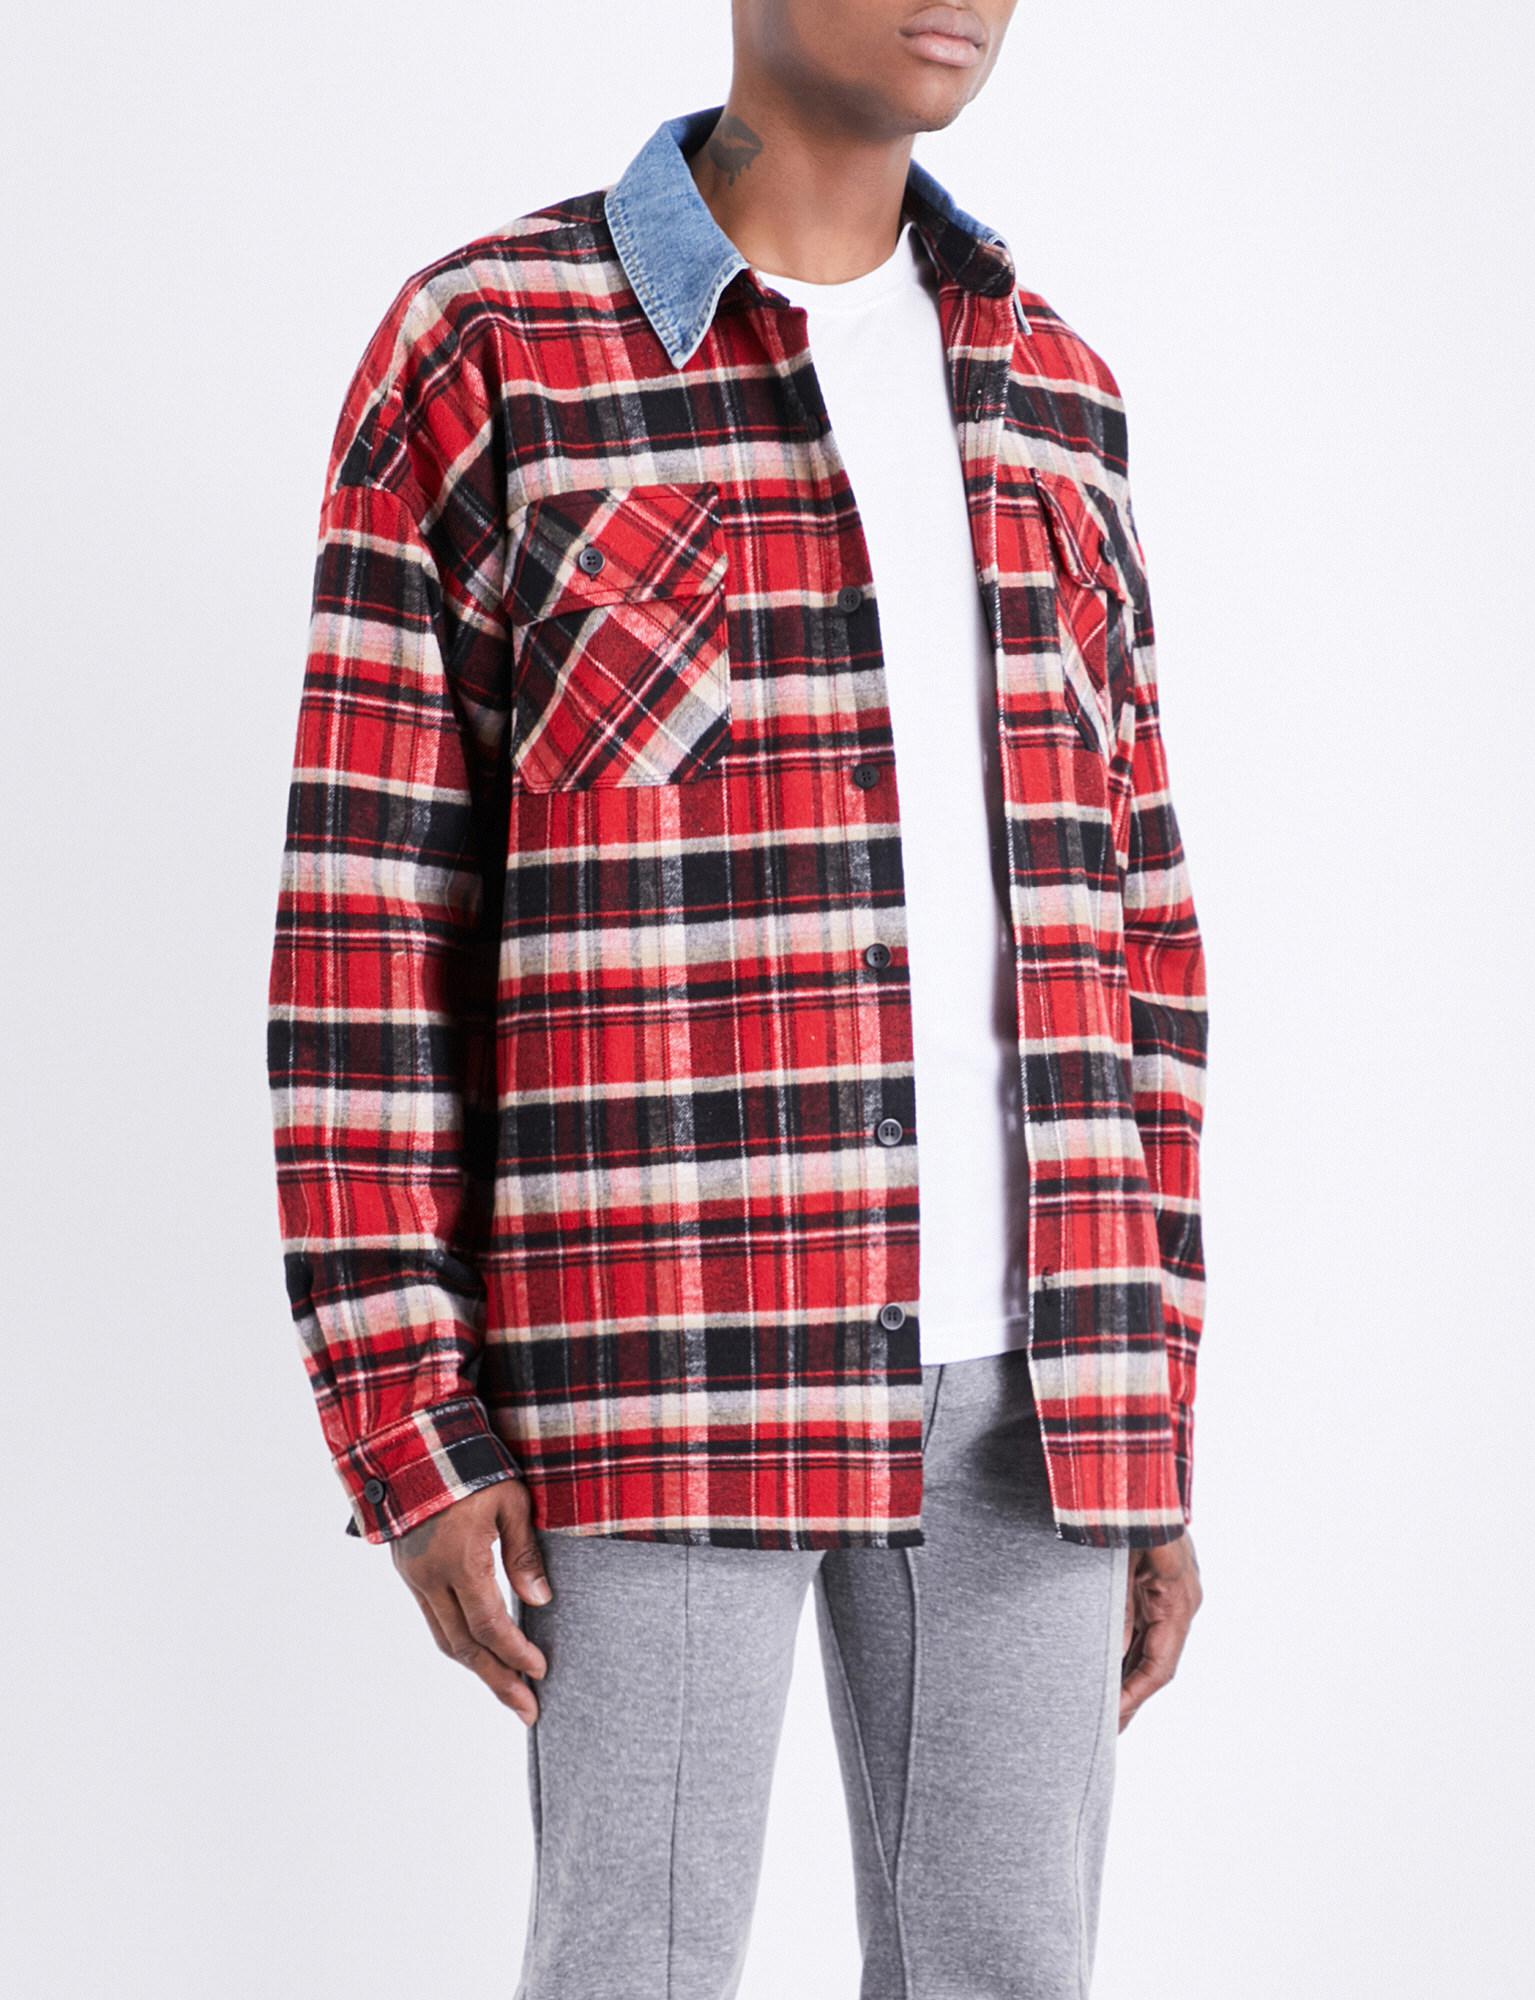 FEAR OF GOD fifth collection シャツ | www.jarussi.com.br